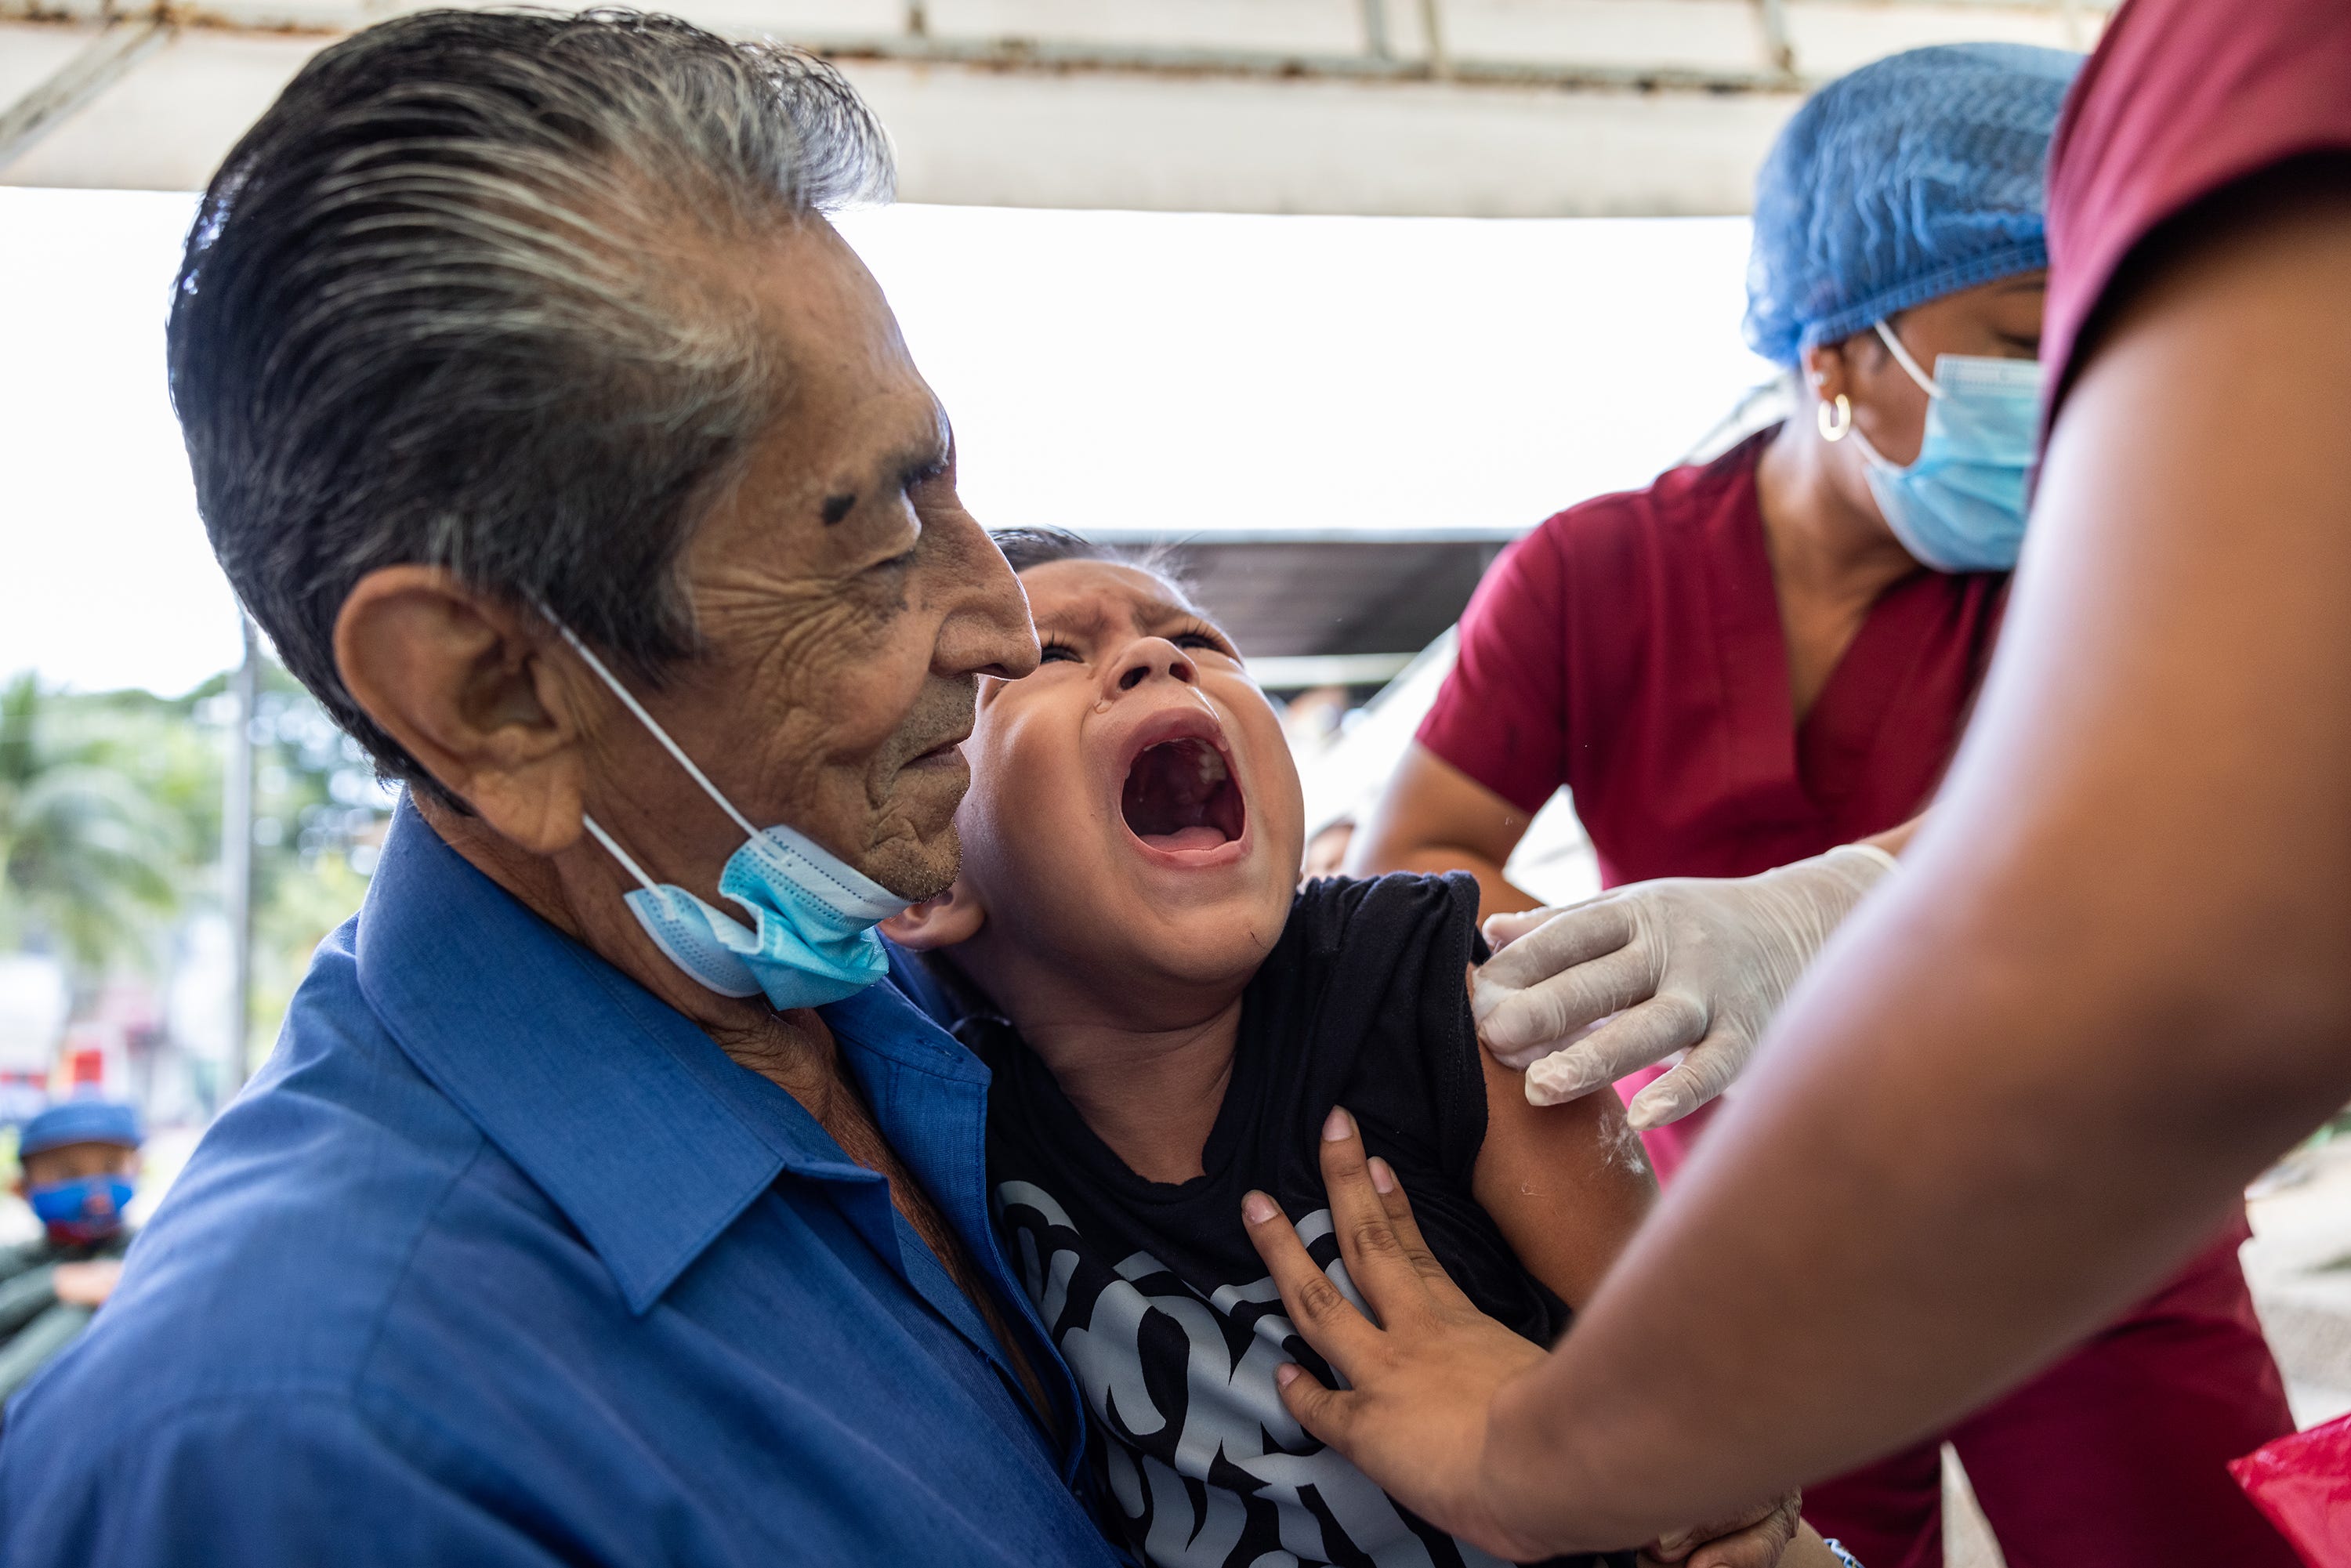 A child screams in fear at the sight of the syringes. The nurses, with the help of his grandfather, try to calm him down in order to proceed with the vaccination.